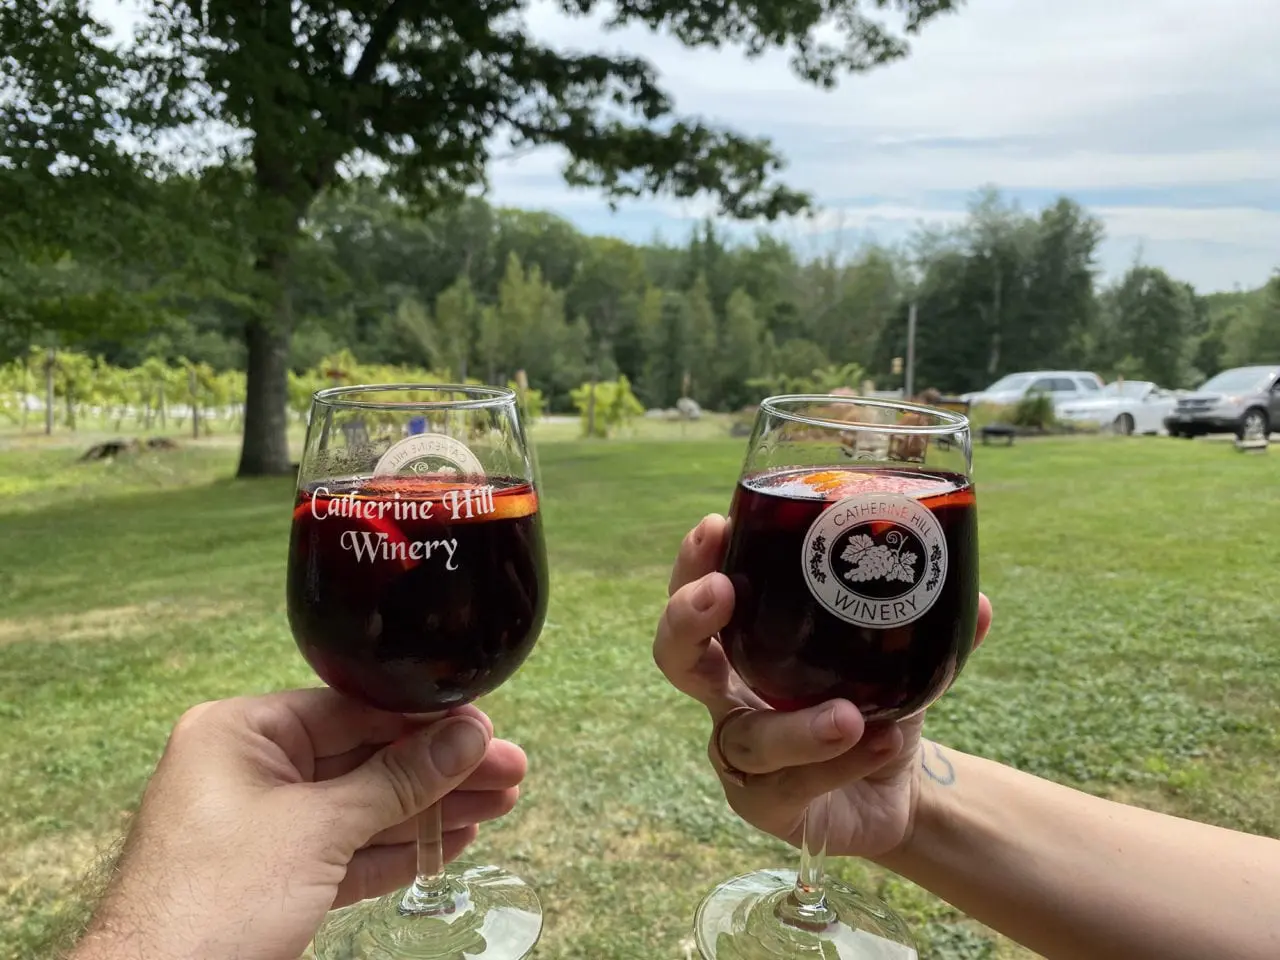 https://acadiaeastcampground.com/wp-content/uploads/2019/01/catherine-hill-winery-near-acadia-national-park--1280x960.jpg